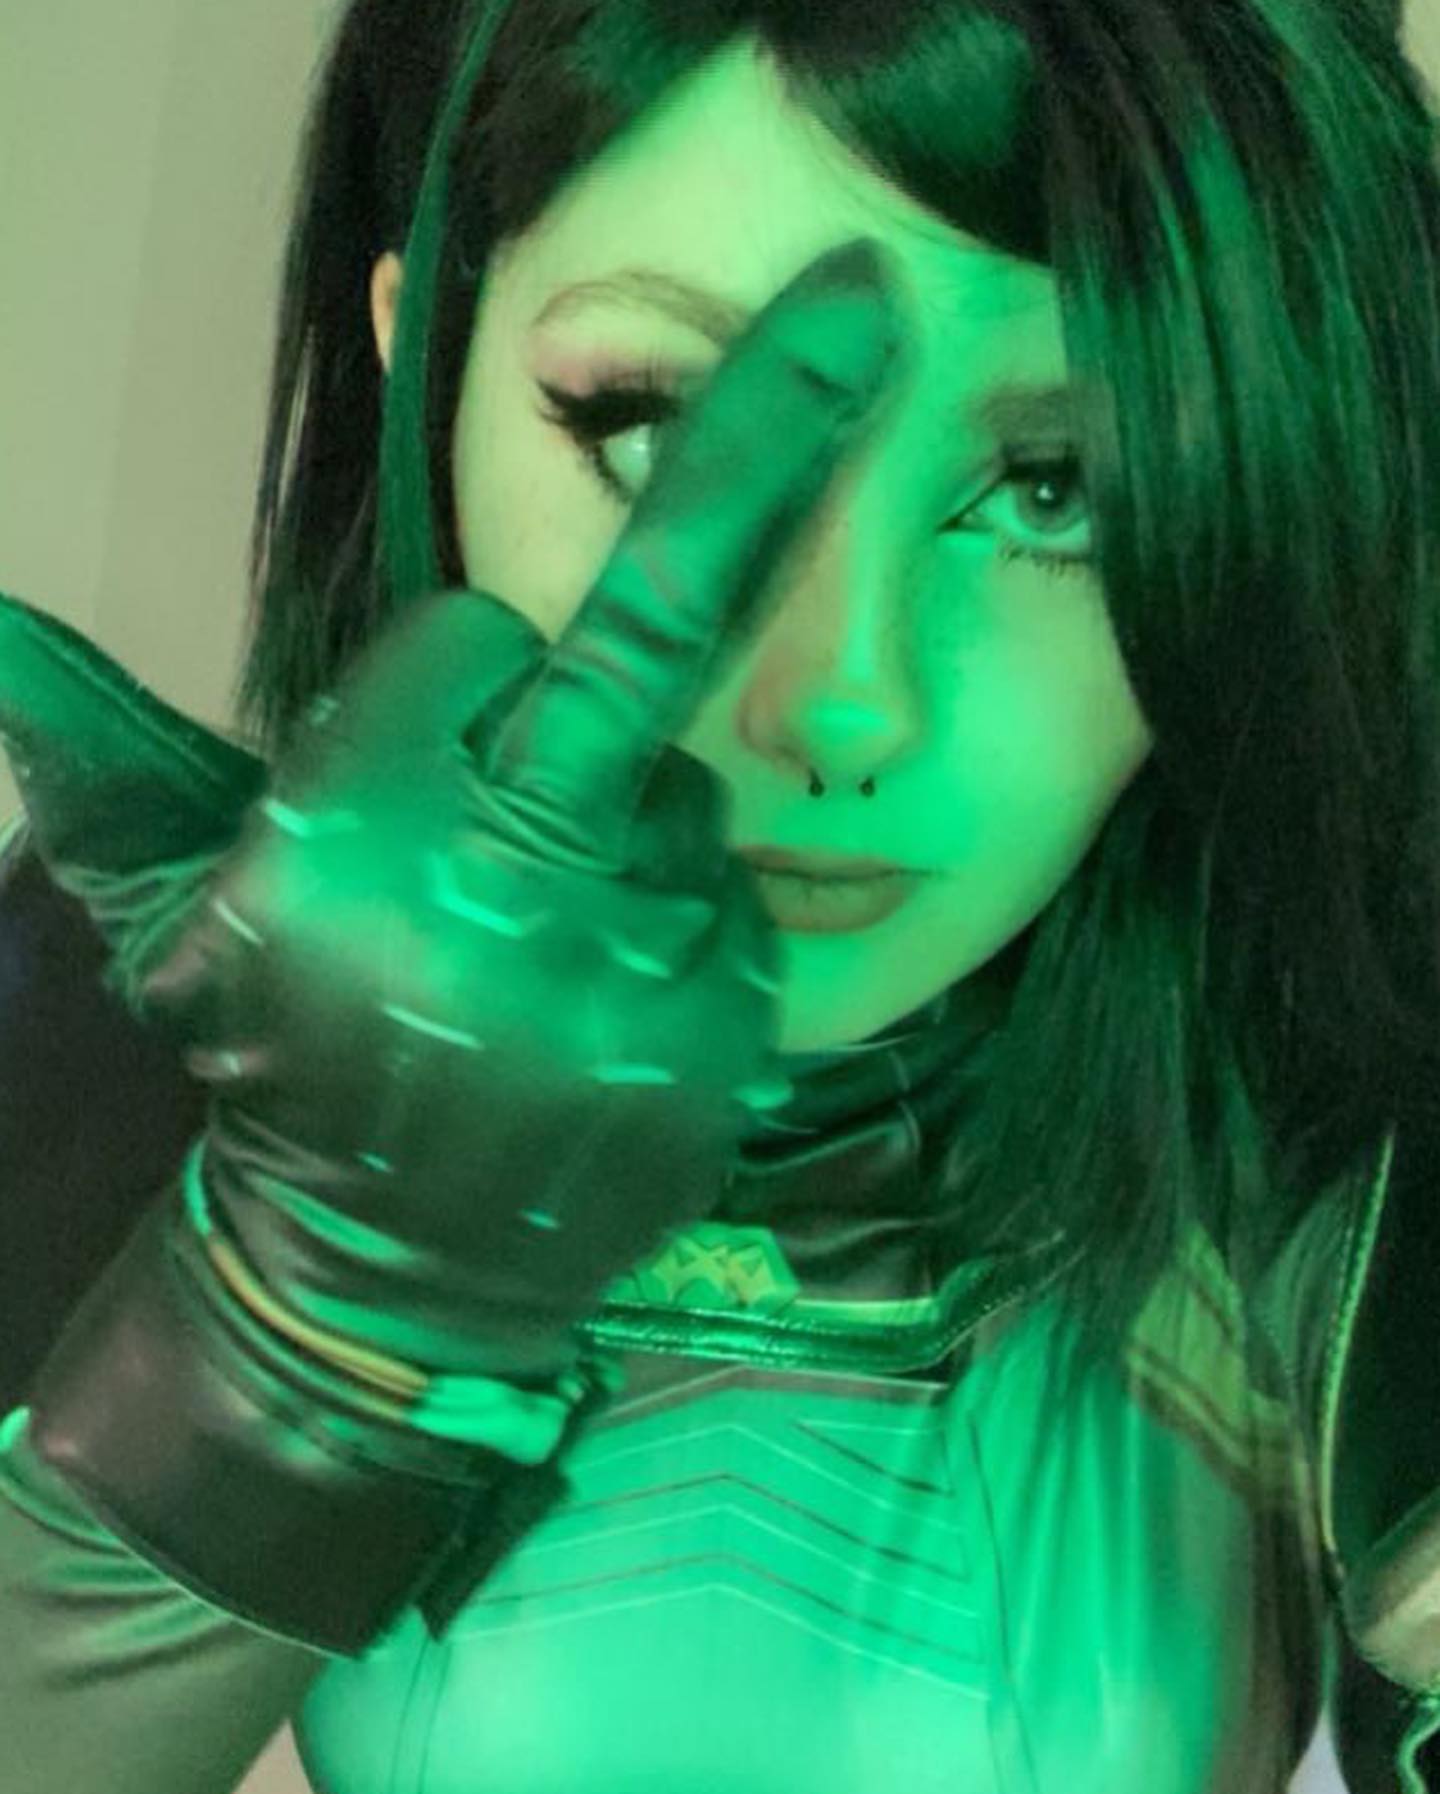 Viper! 🧪
-
please giv me riot gunbuddy 😔🙏
still love the cosplay on me :] this pic is a bit older, but it still slays 😼
-
tags!
#cosplay #cosplayer #cosplaying #cosplaygirl #valorant #riotgames #valorantcosplay #valorantviper #vipercosplay #vipervalorant #gaming #gamer #riot